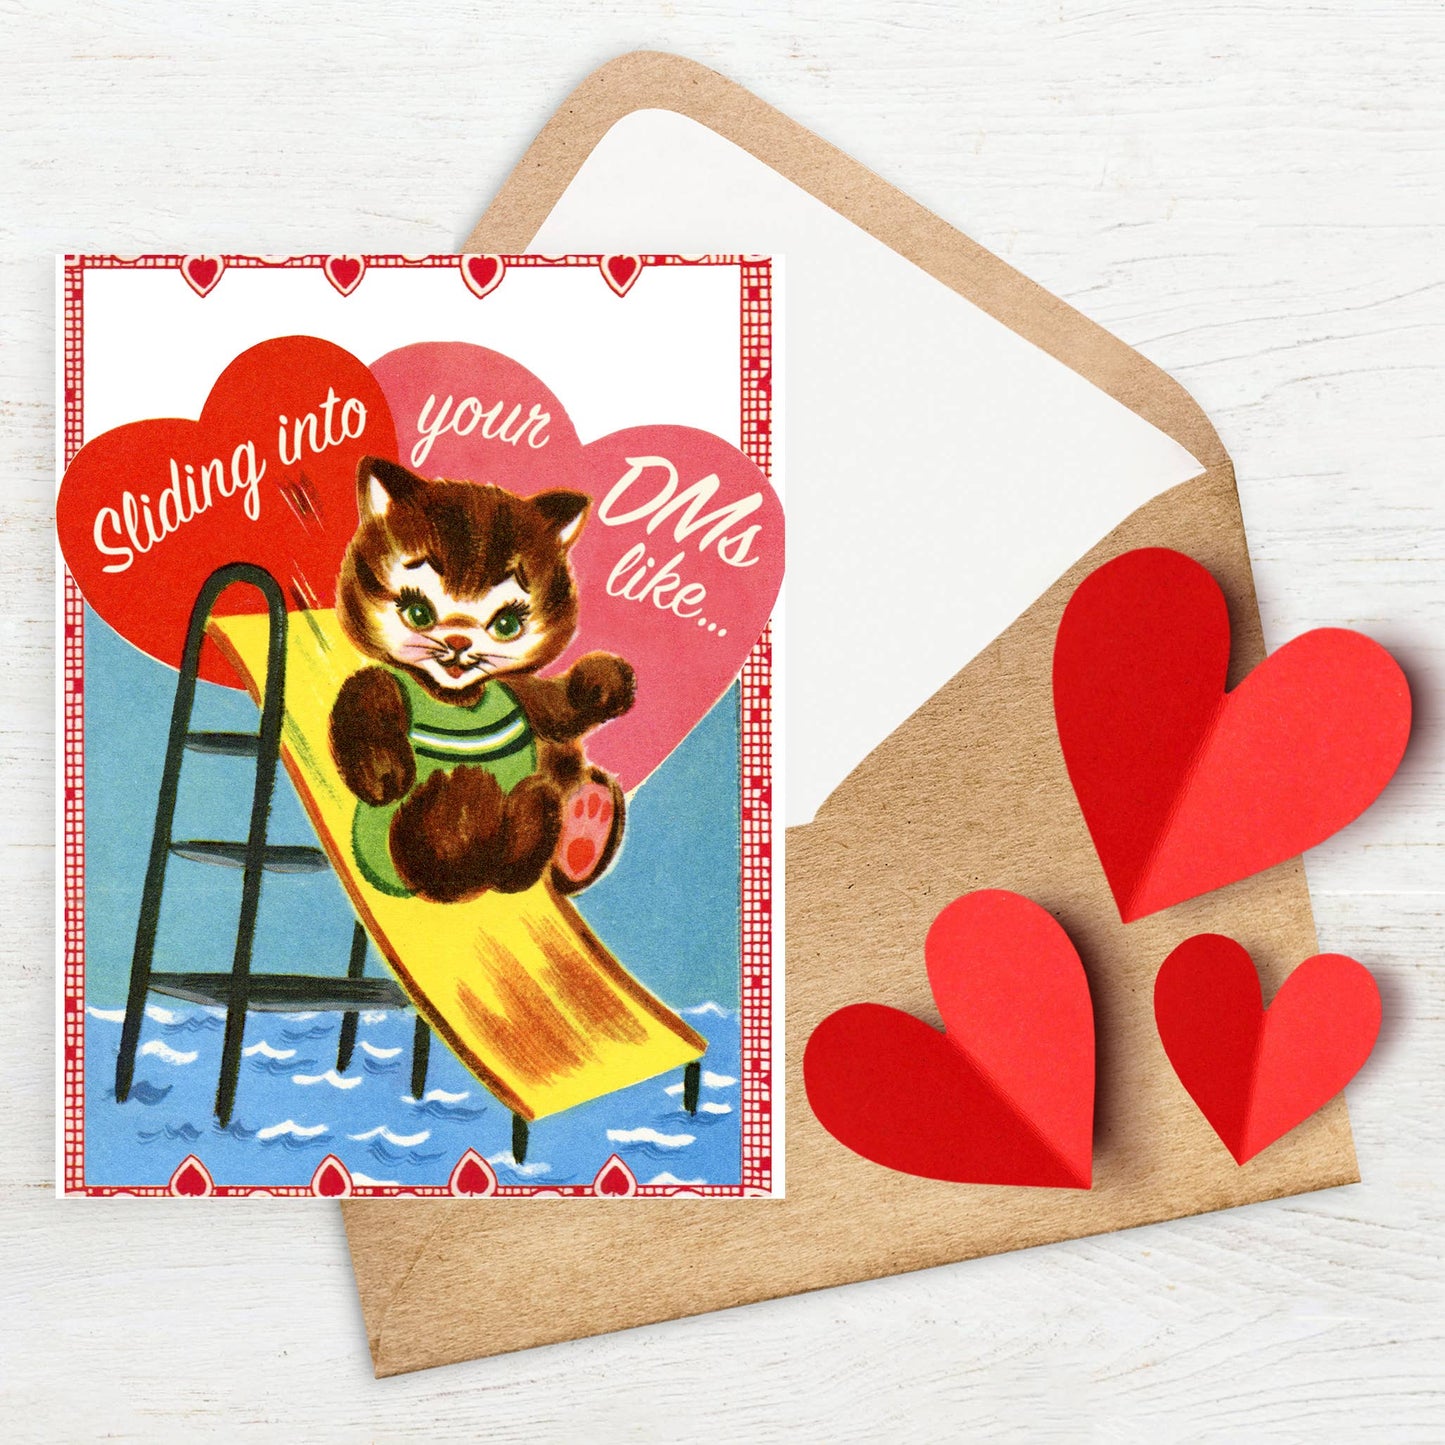 VALENTINE'S DAY: "Sliding into Your DMs" notecard